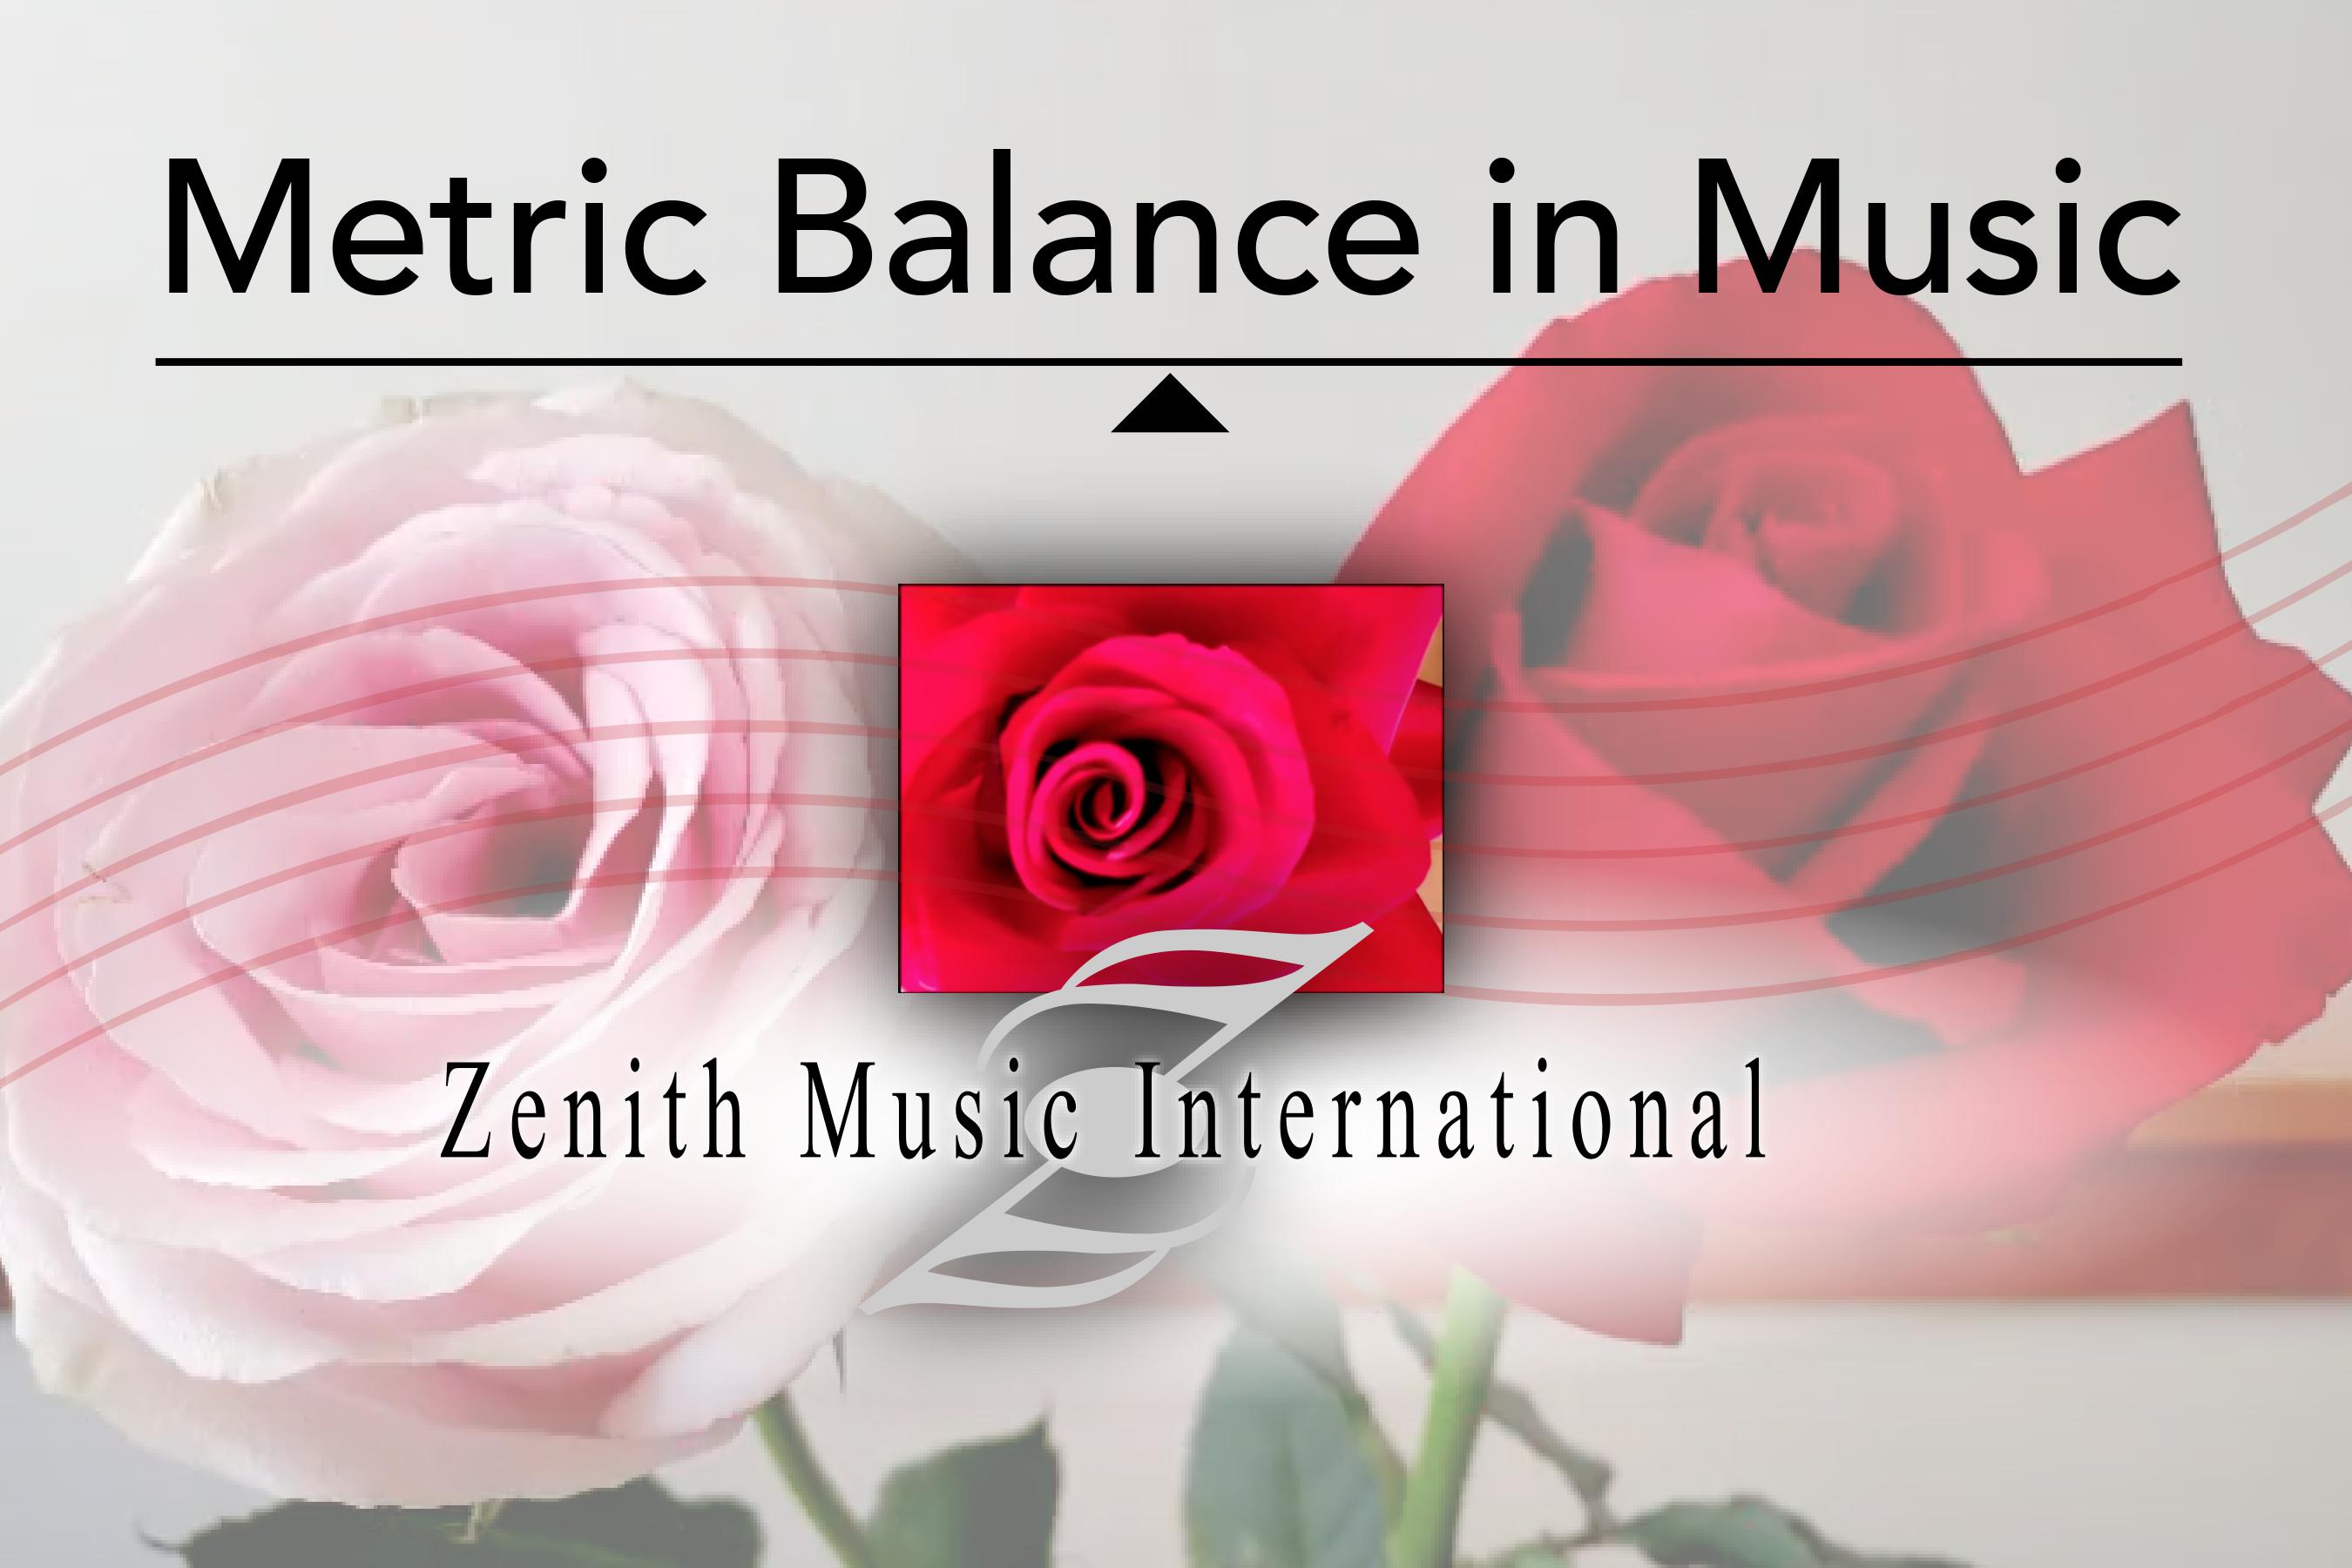 Metric Balance in Music is available on YouTube.com
Complete 51 minutes
Part 1 Concept 31:36
Part 2 - 4:57
Part 3 - 5:01
Part 4 - 9:19